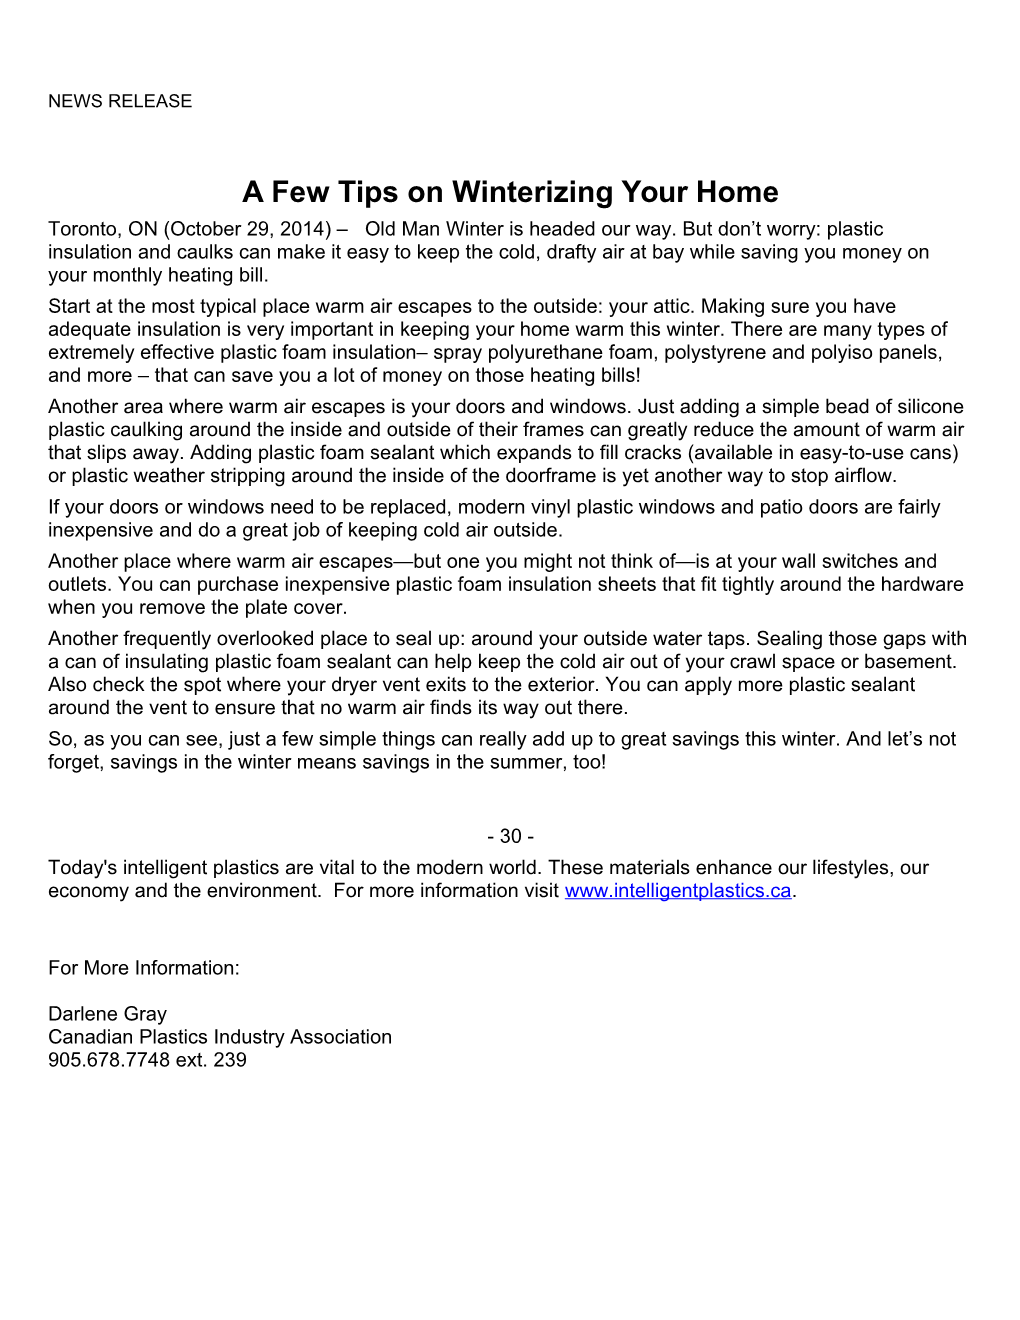 A Few Tips on Winterizing Your Home